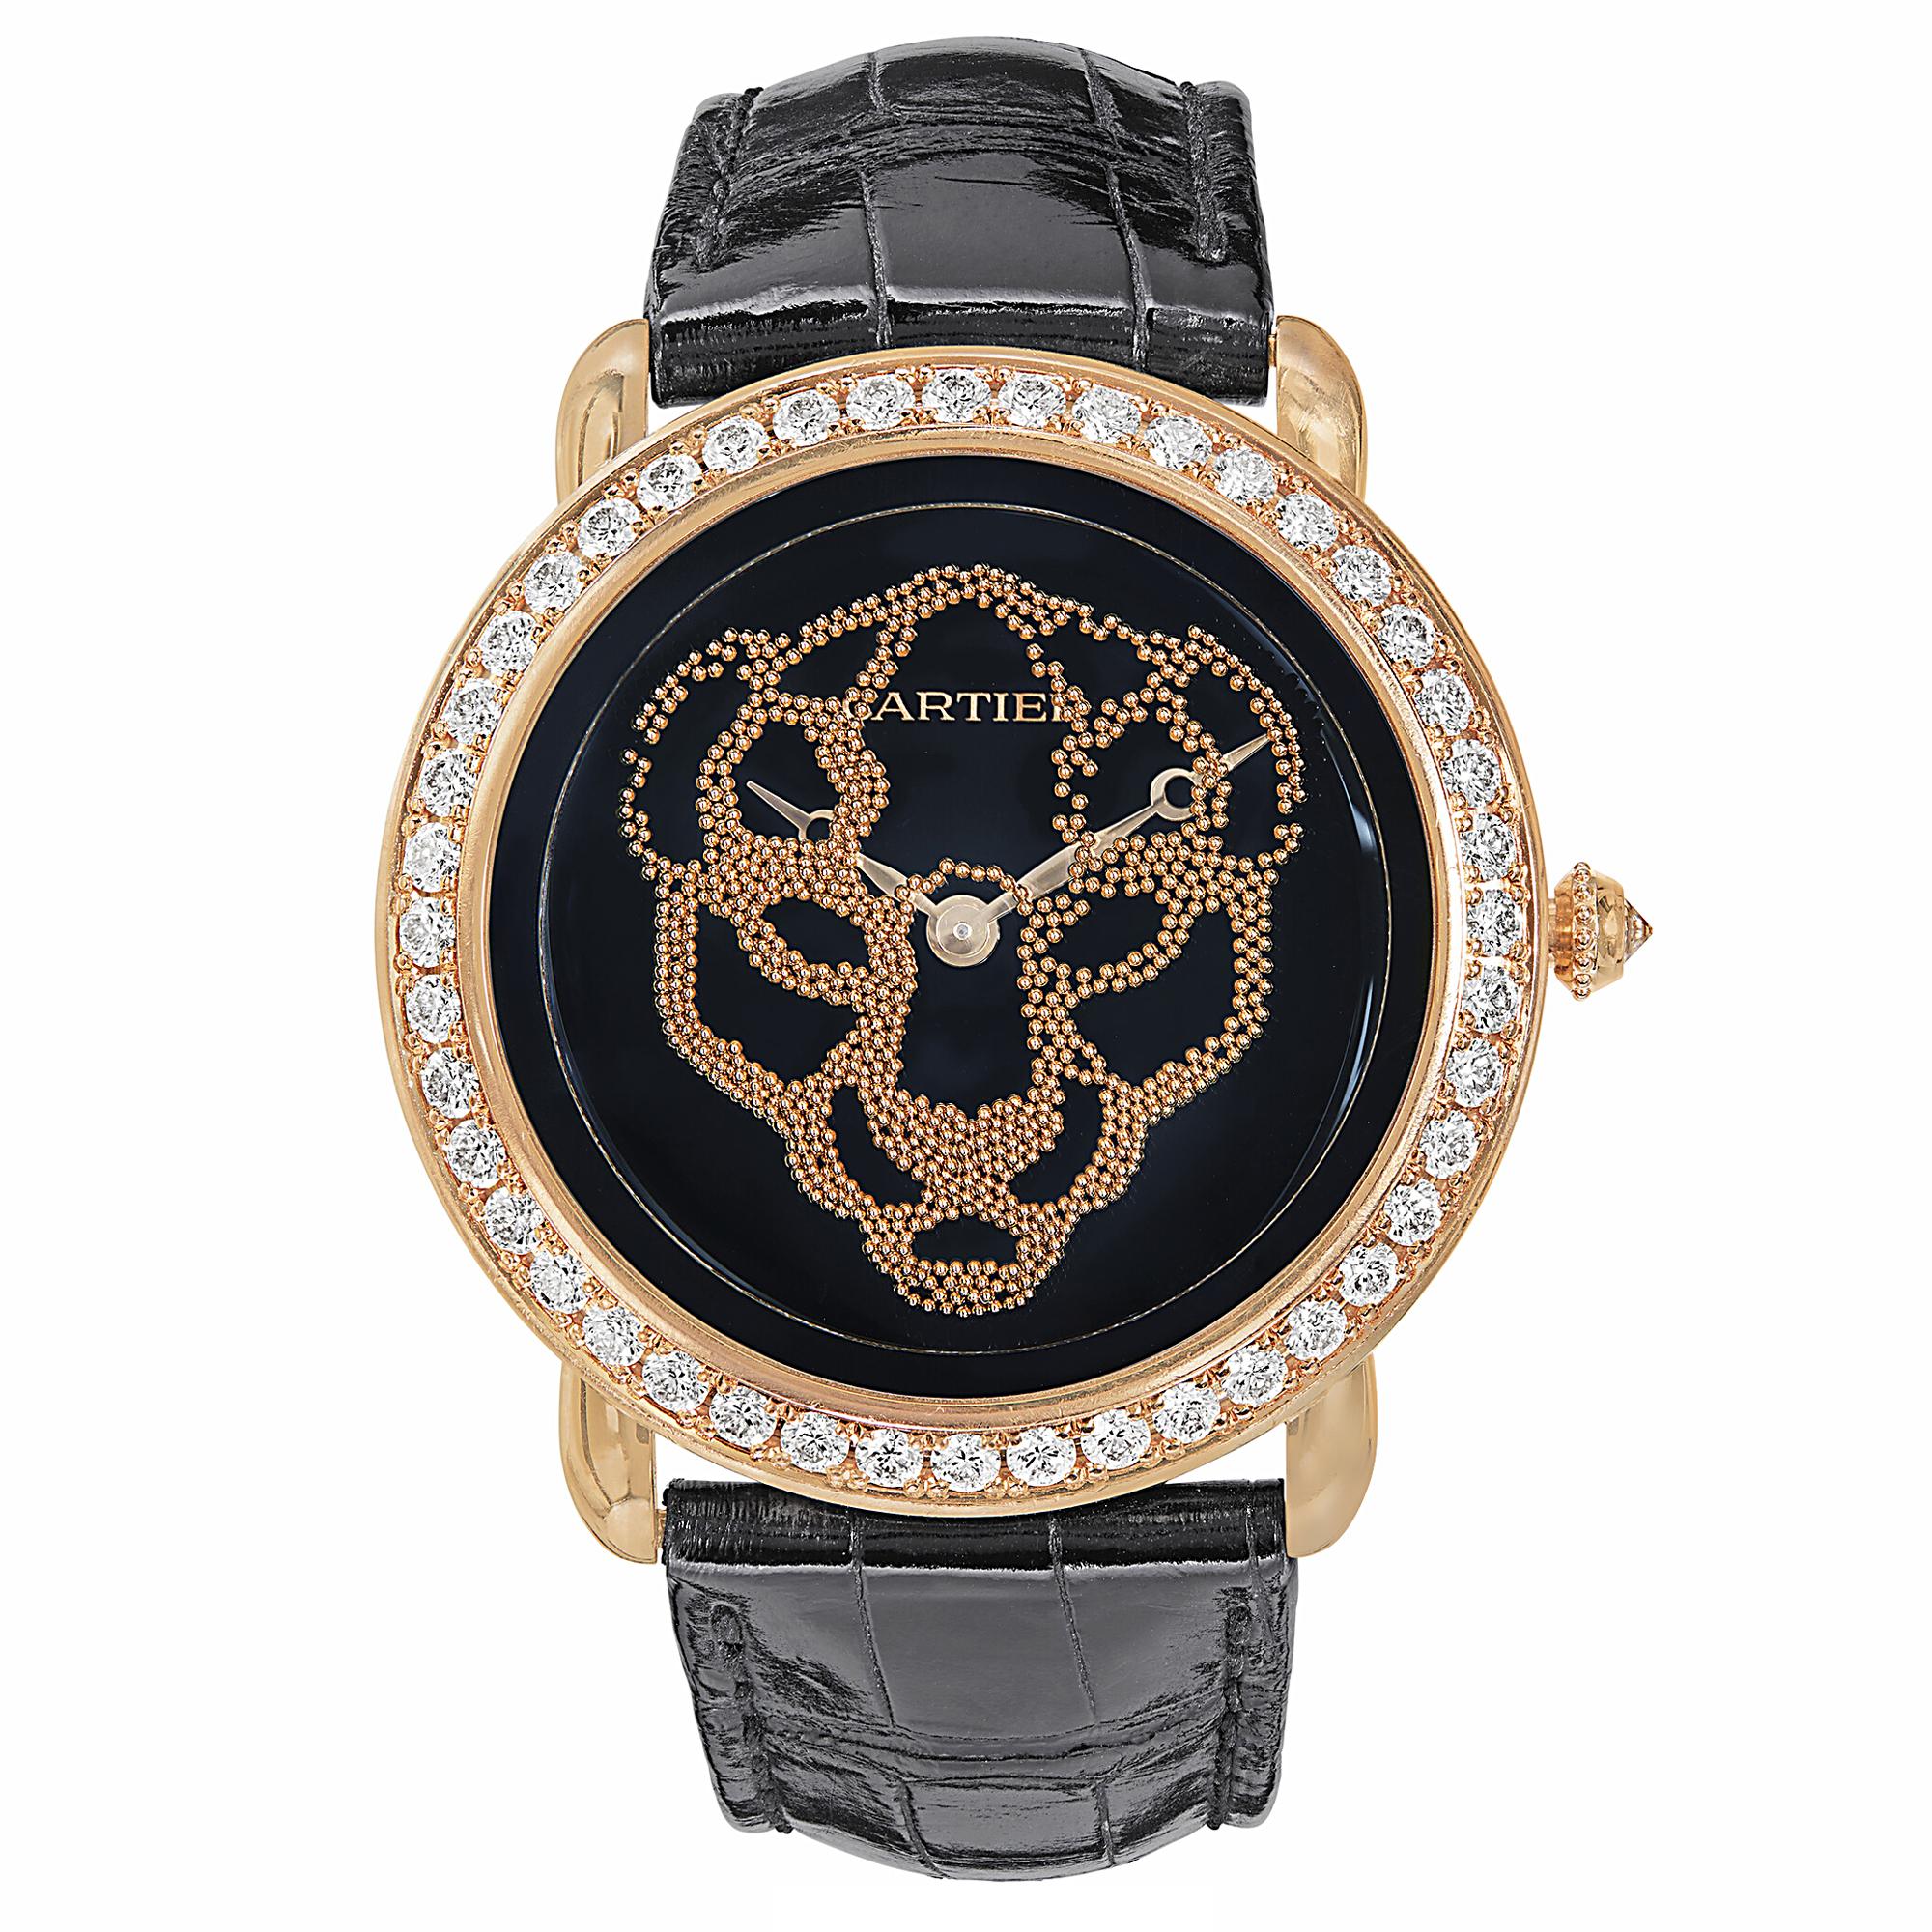 The Cartier Diamond and Gold 'Révélation d'Une Panthère' wristwatch is a masterpiece of luxury and craftsmanship, designed to capture the imagination and enchant the senses. Encased in 18k rose gold, this watch boasts a 37mm diameter that perfectly